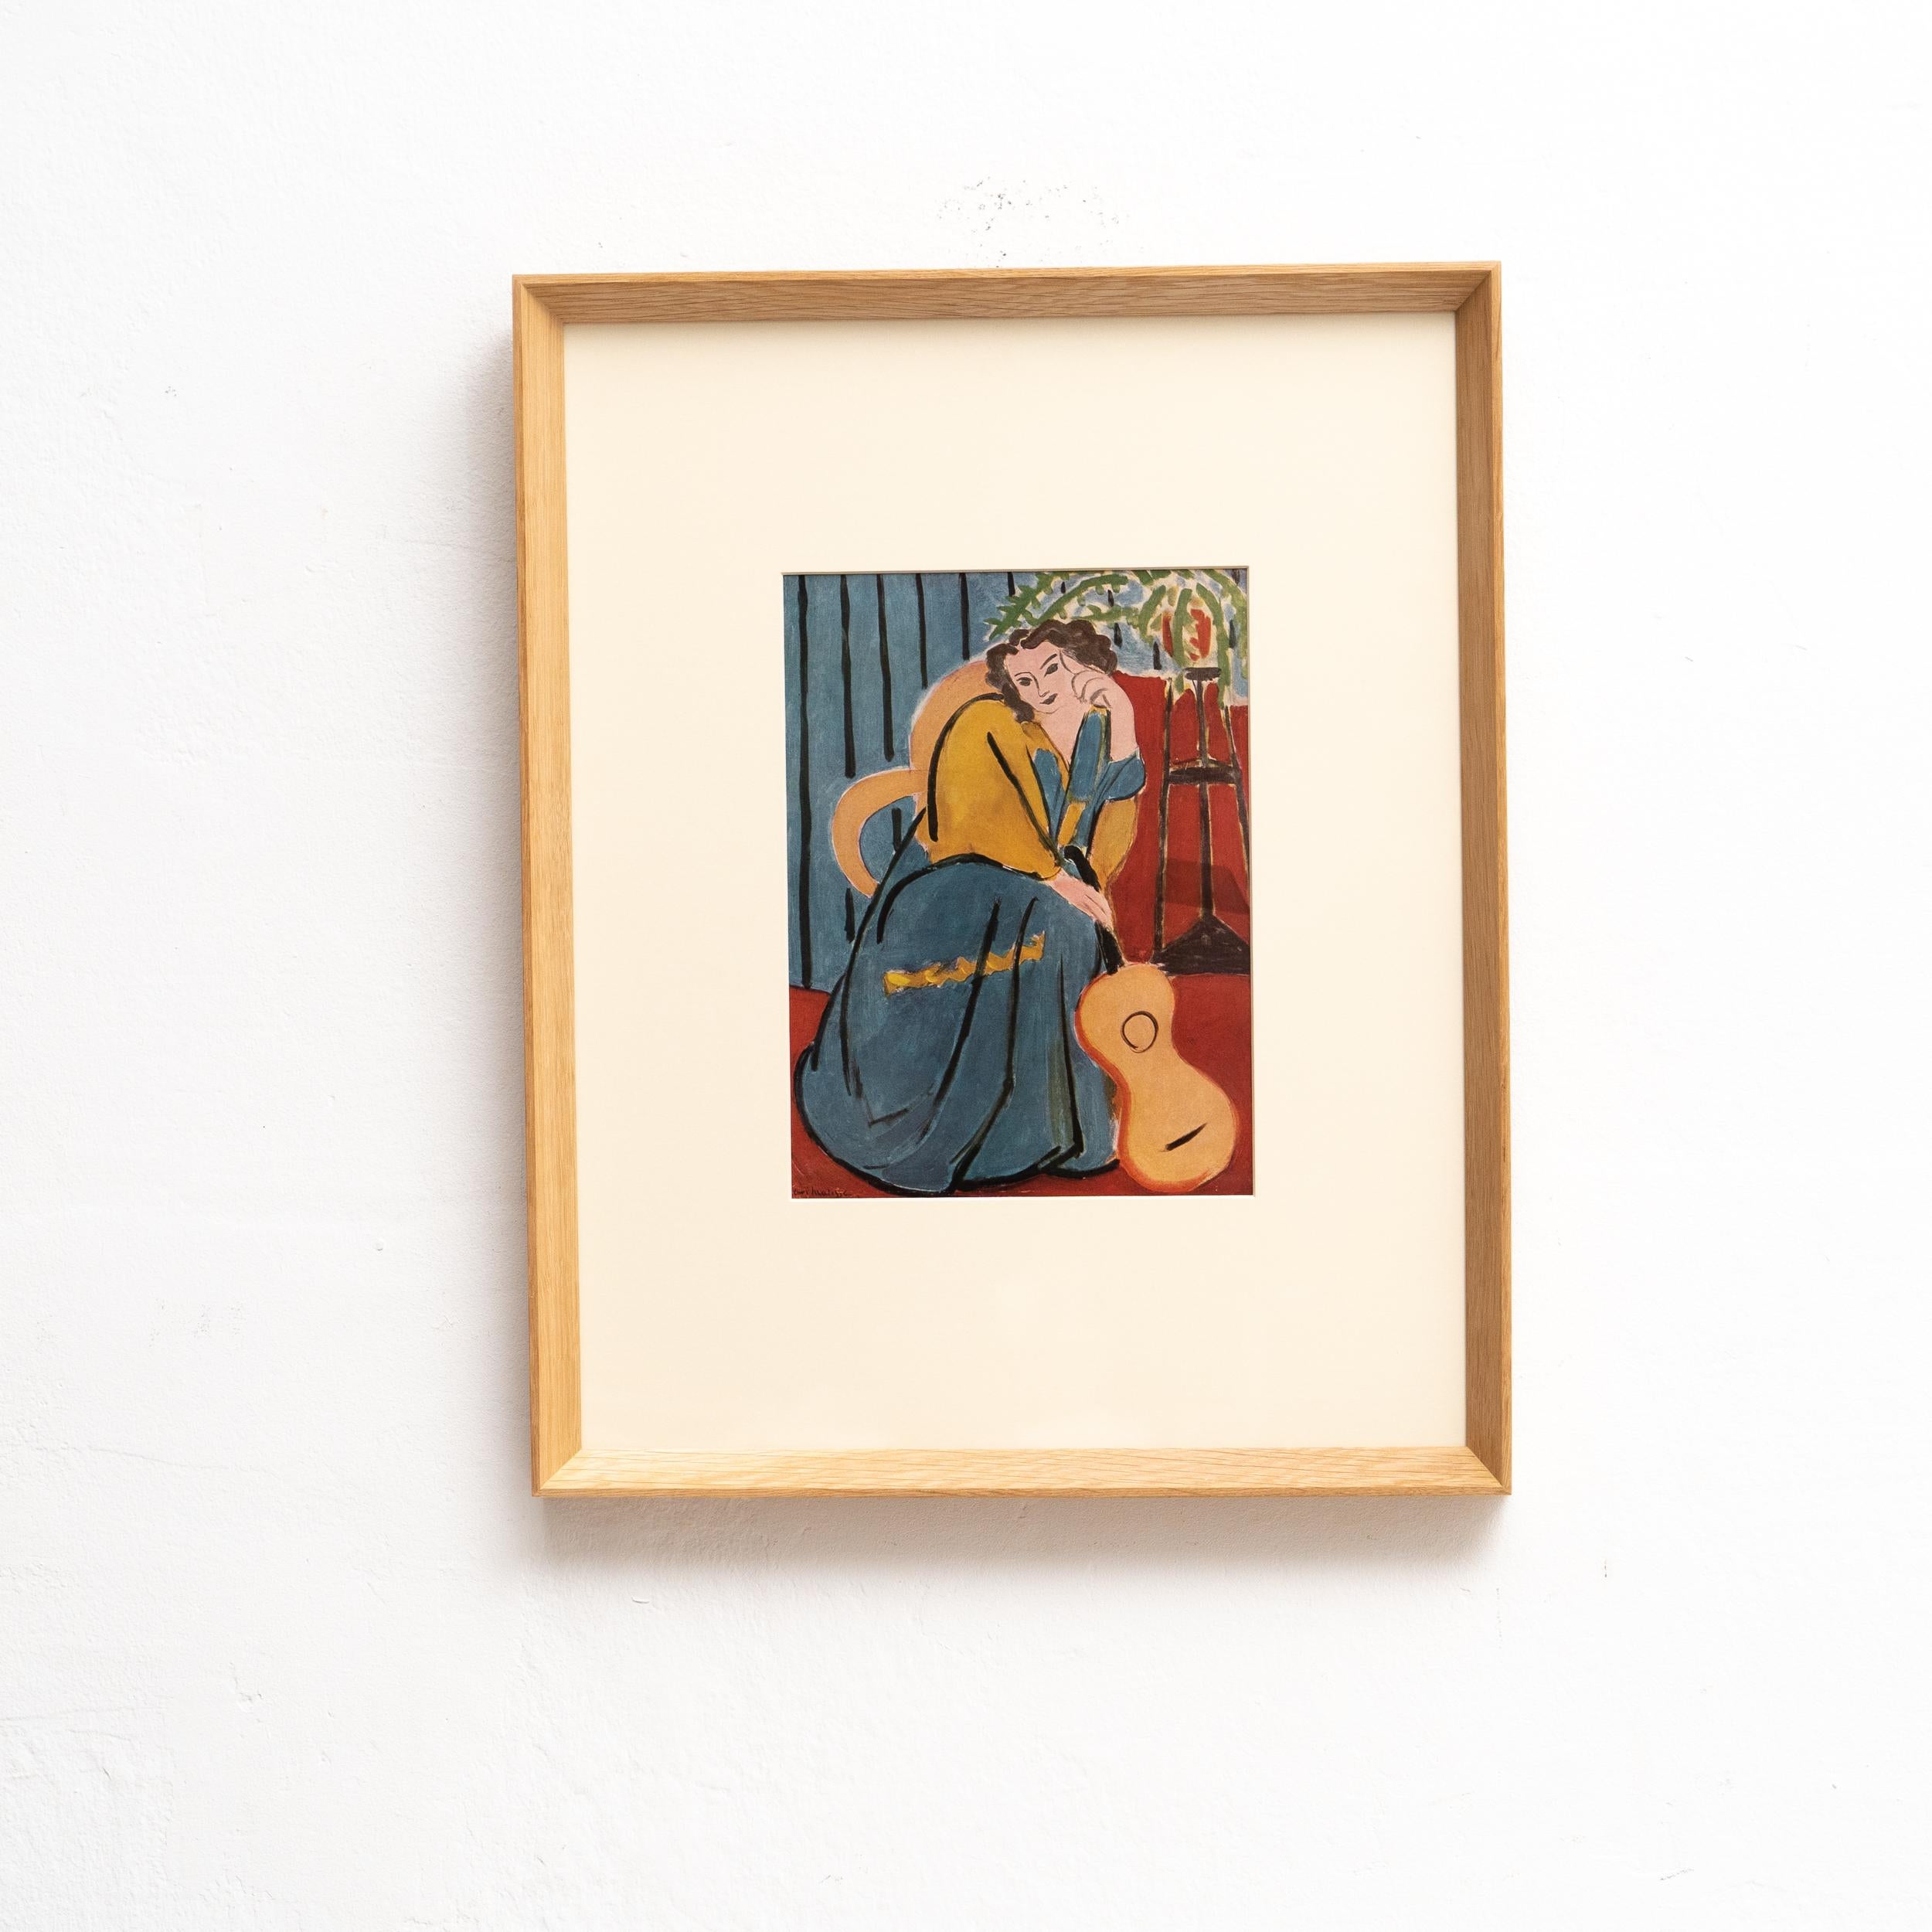 Indulge in the artistic brilliance of Henri Matisse with this rare color lithograph, meticulously edited by Editions du Chene in Paris, France, in 1943. Framed in a stunning solid wood frame, this artwork measures 51cm in height and 40.5cm in width,